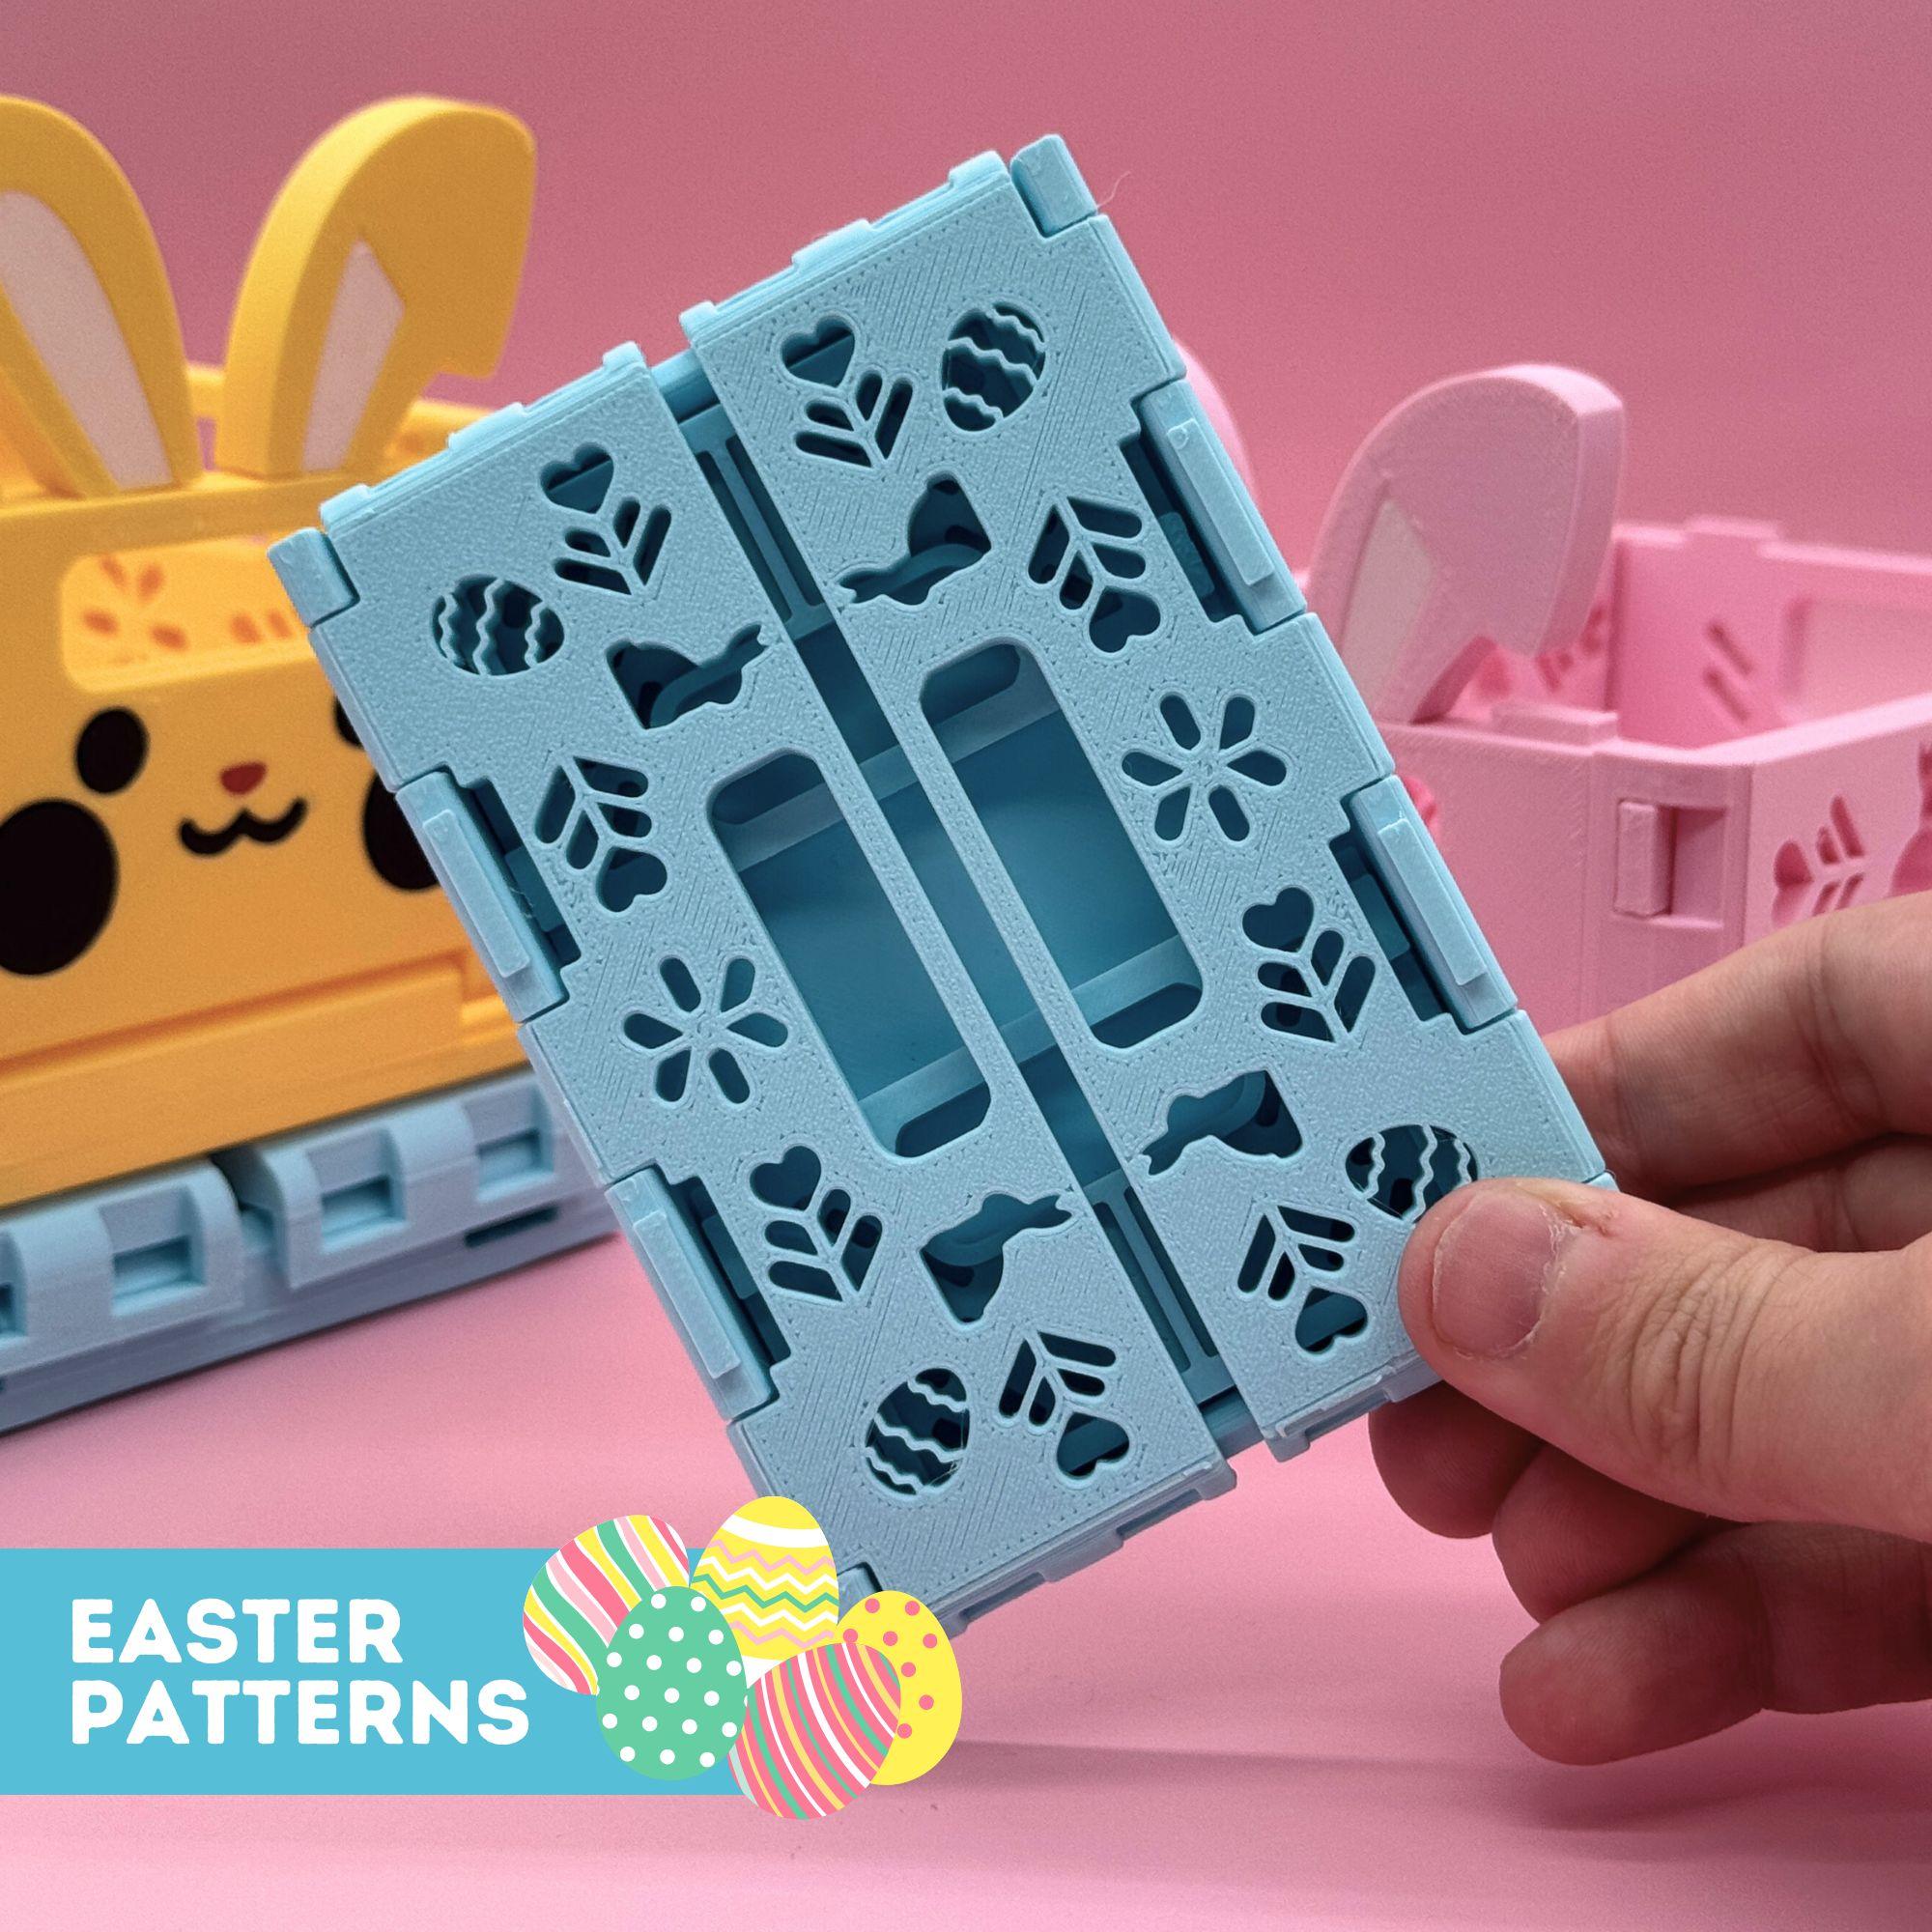 3D Printable Easter Foldable and Stackable Storage Crate Easter Edition 3d model